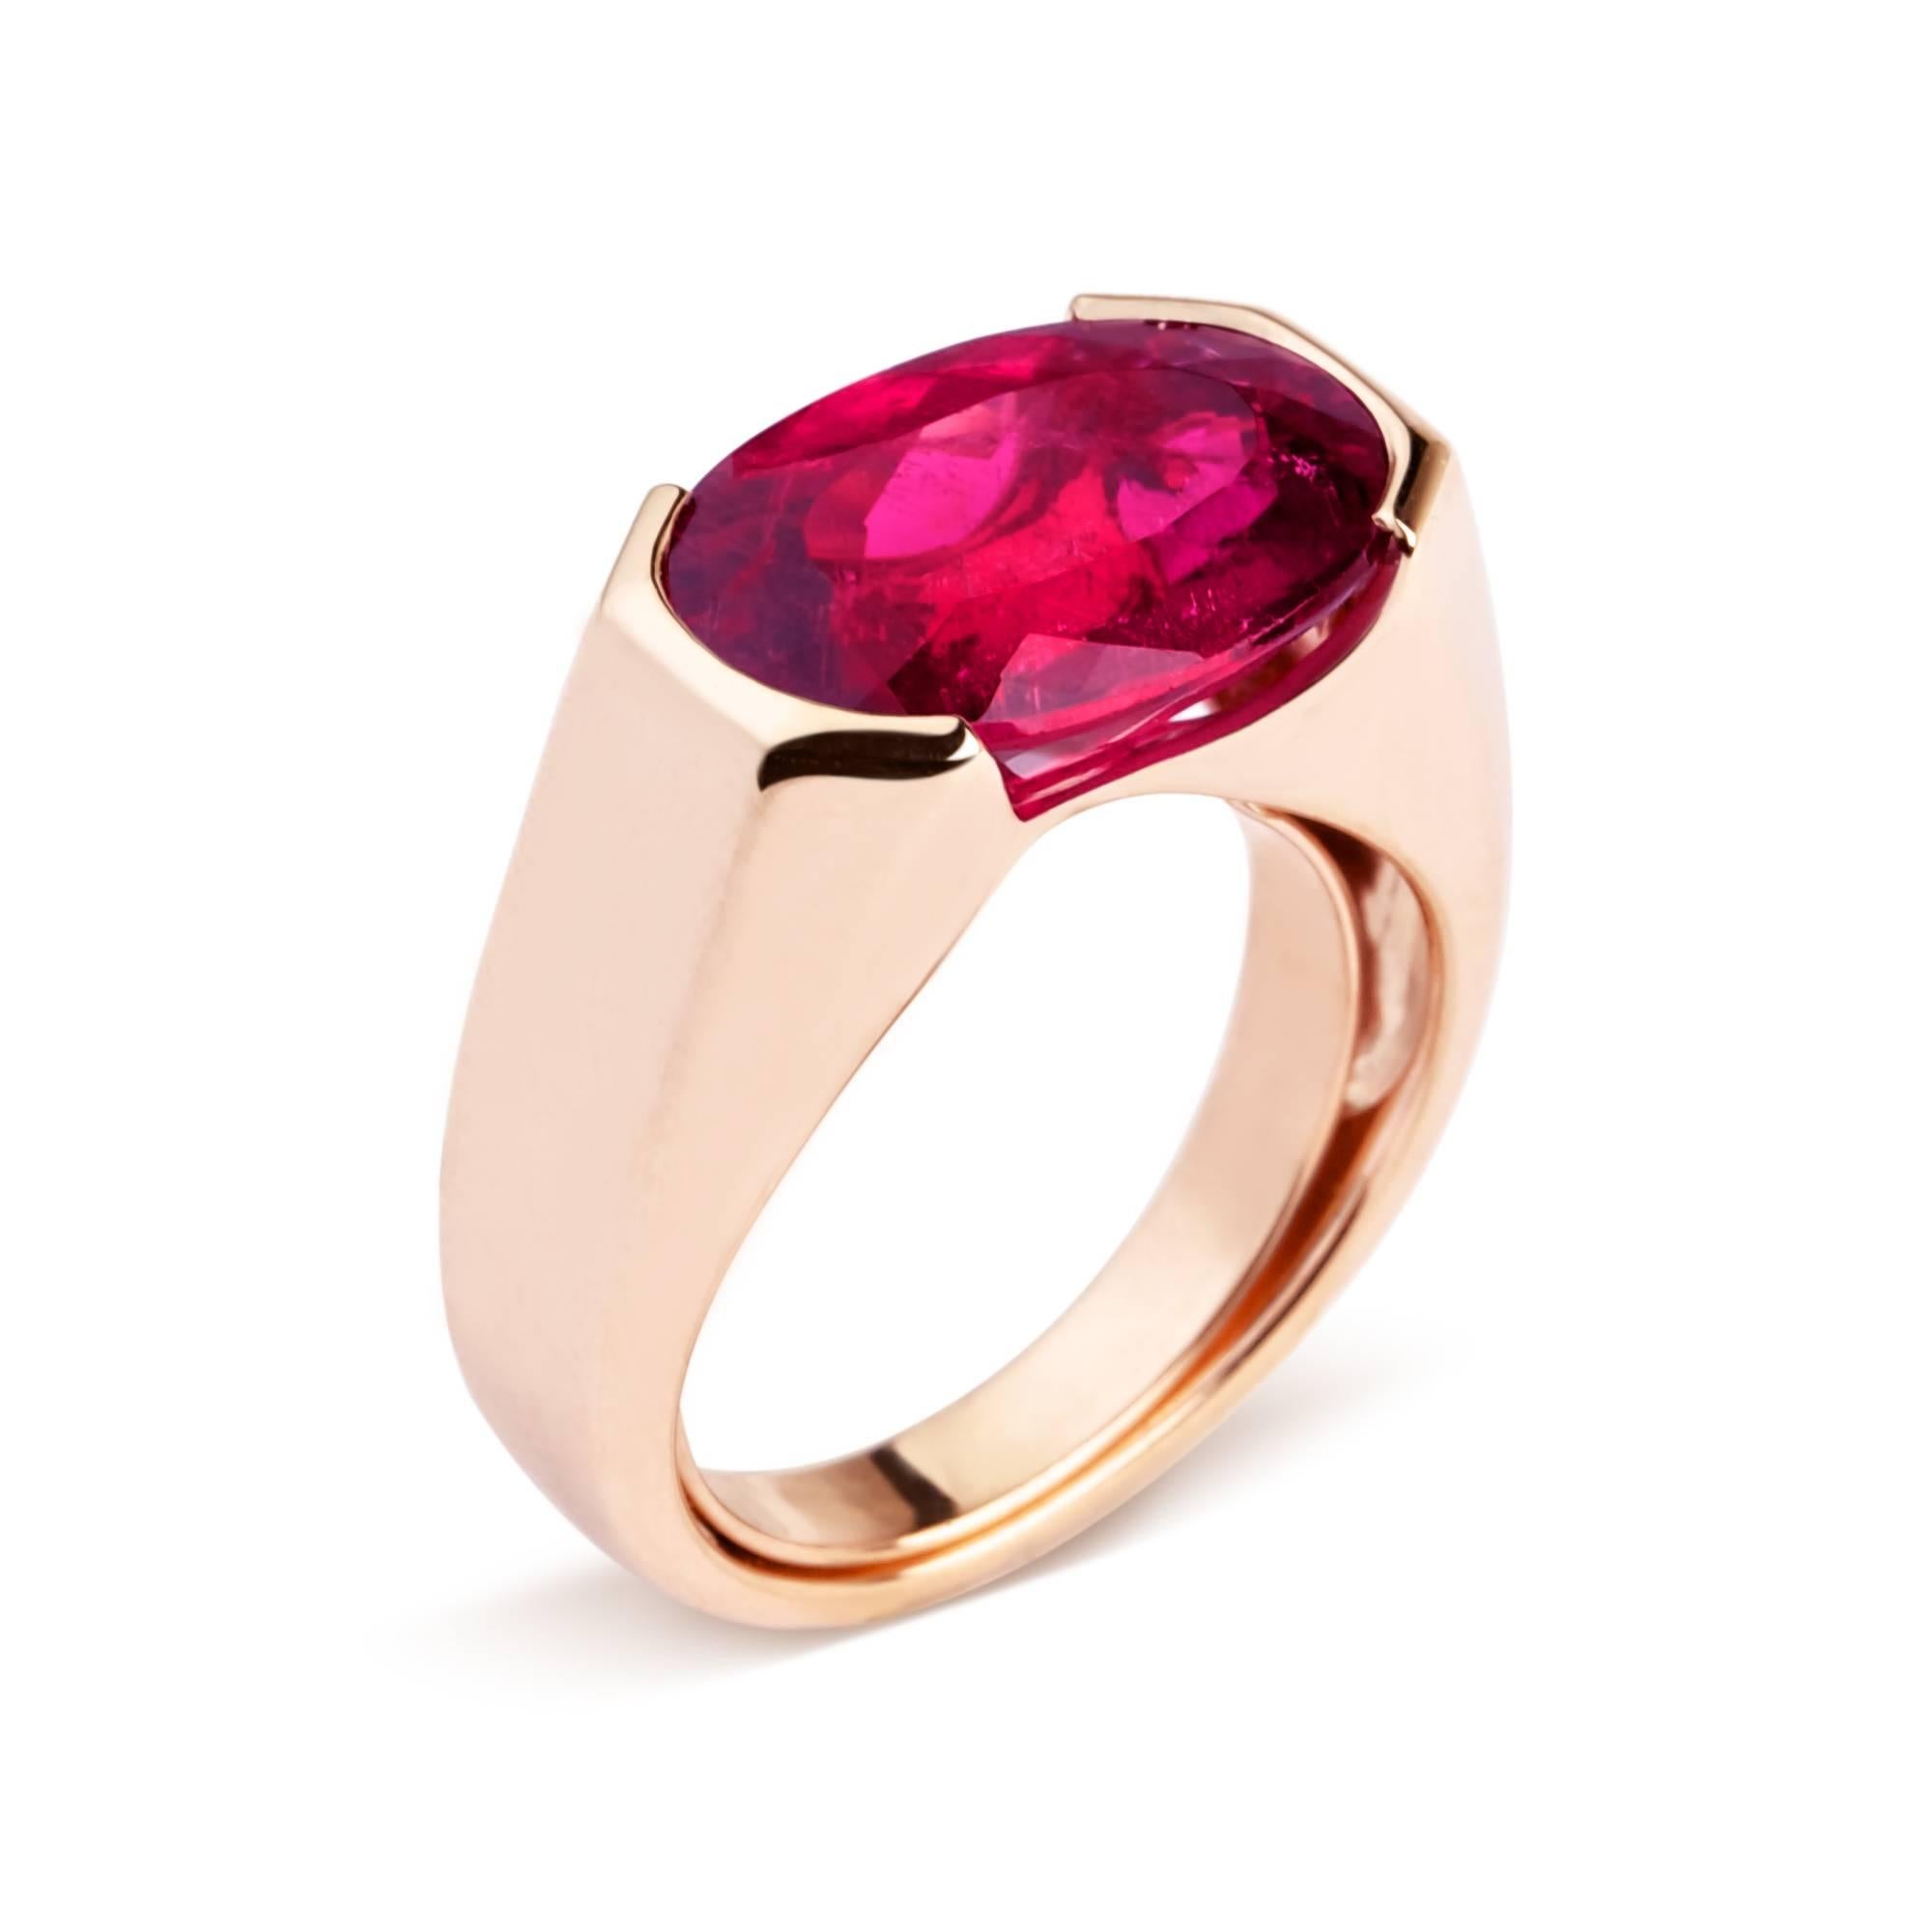 Handmade in Italy
Rubelite 8.58ct. - Rose Gold 18k
Italian size 14.5 - US size 7 - FR size 54.5
The ring have an internal spring to adjust the size up to two sizes less.